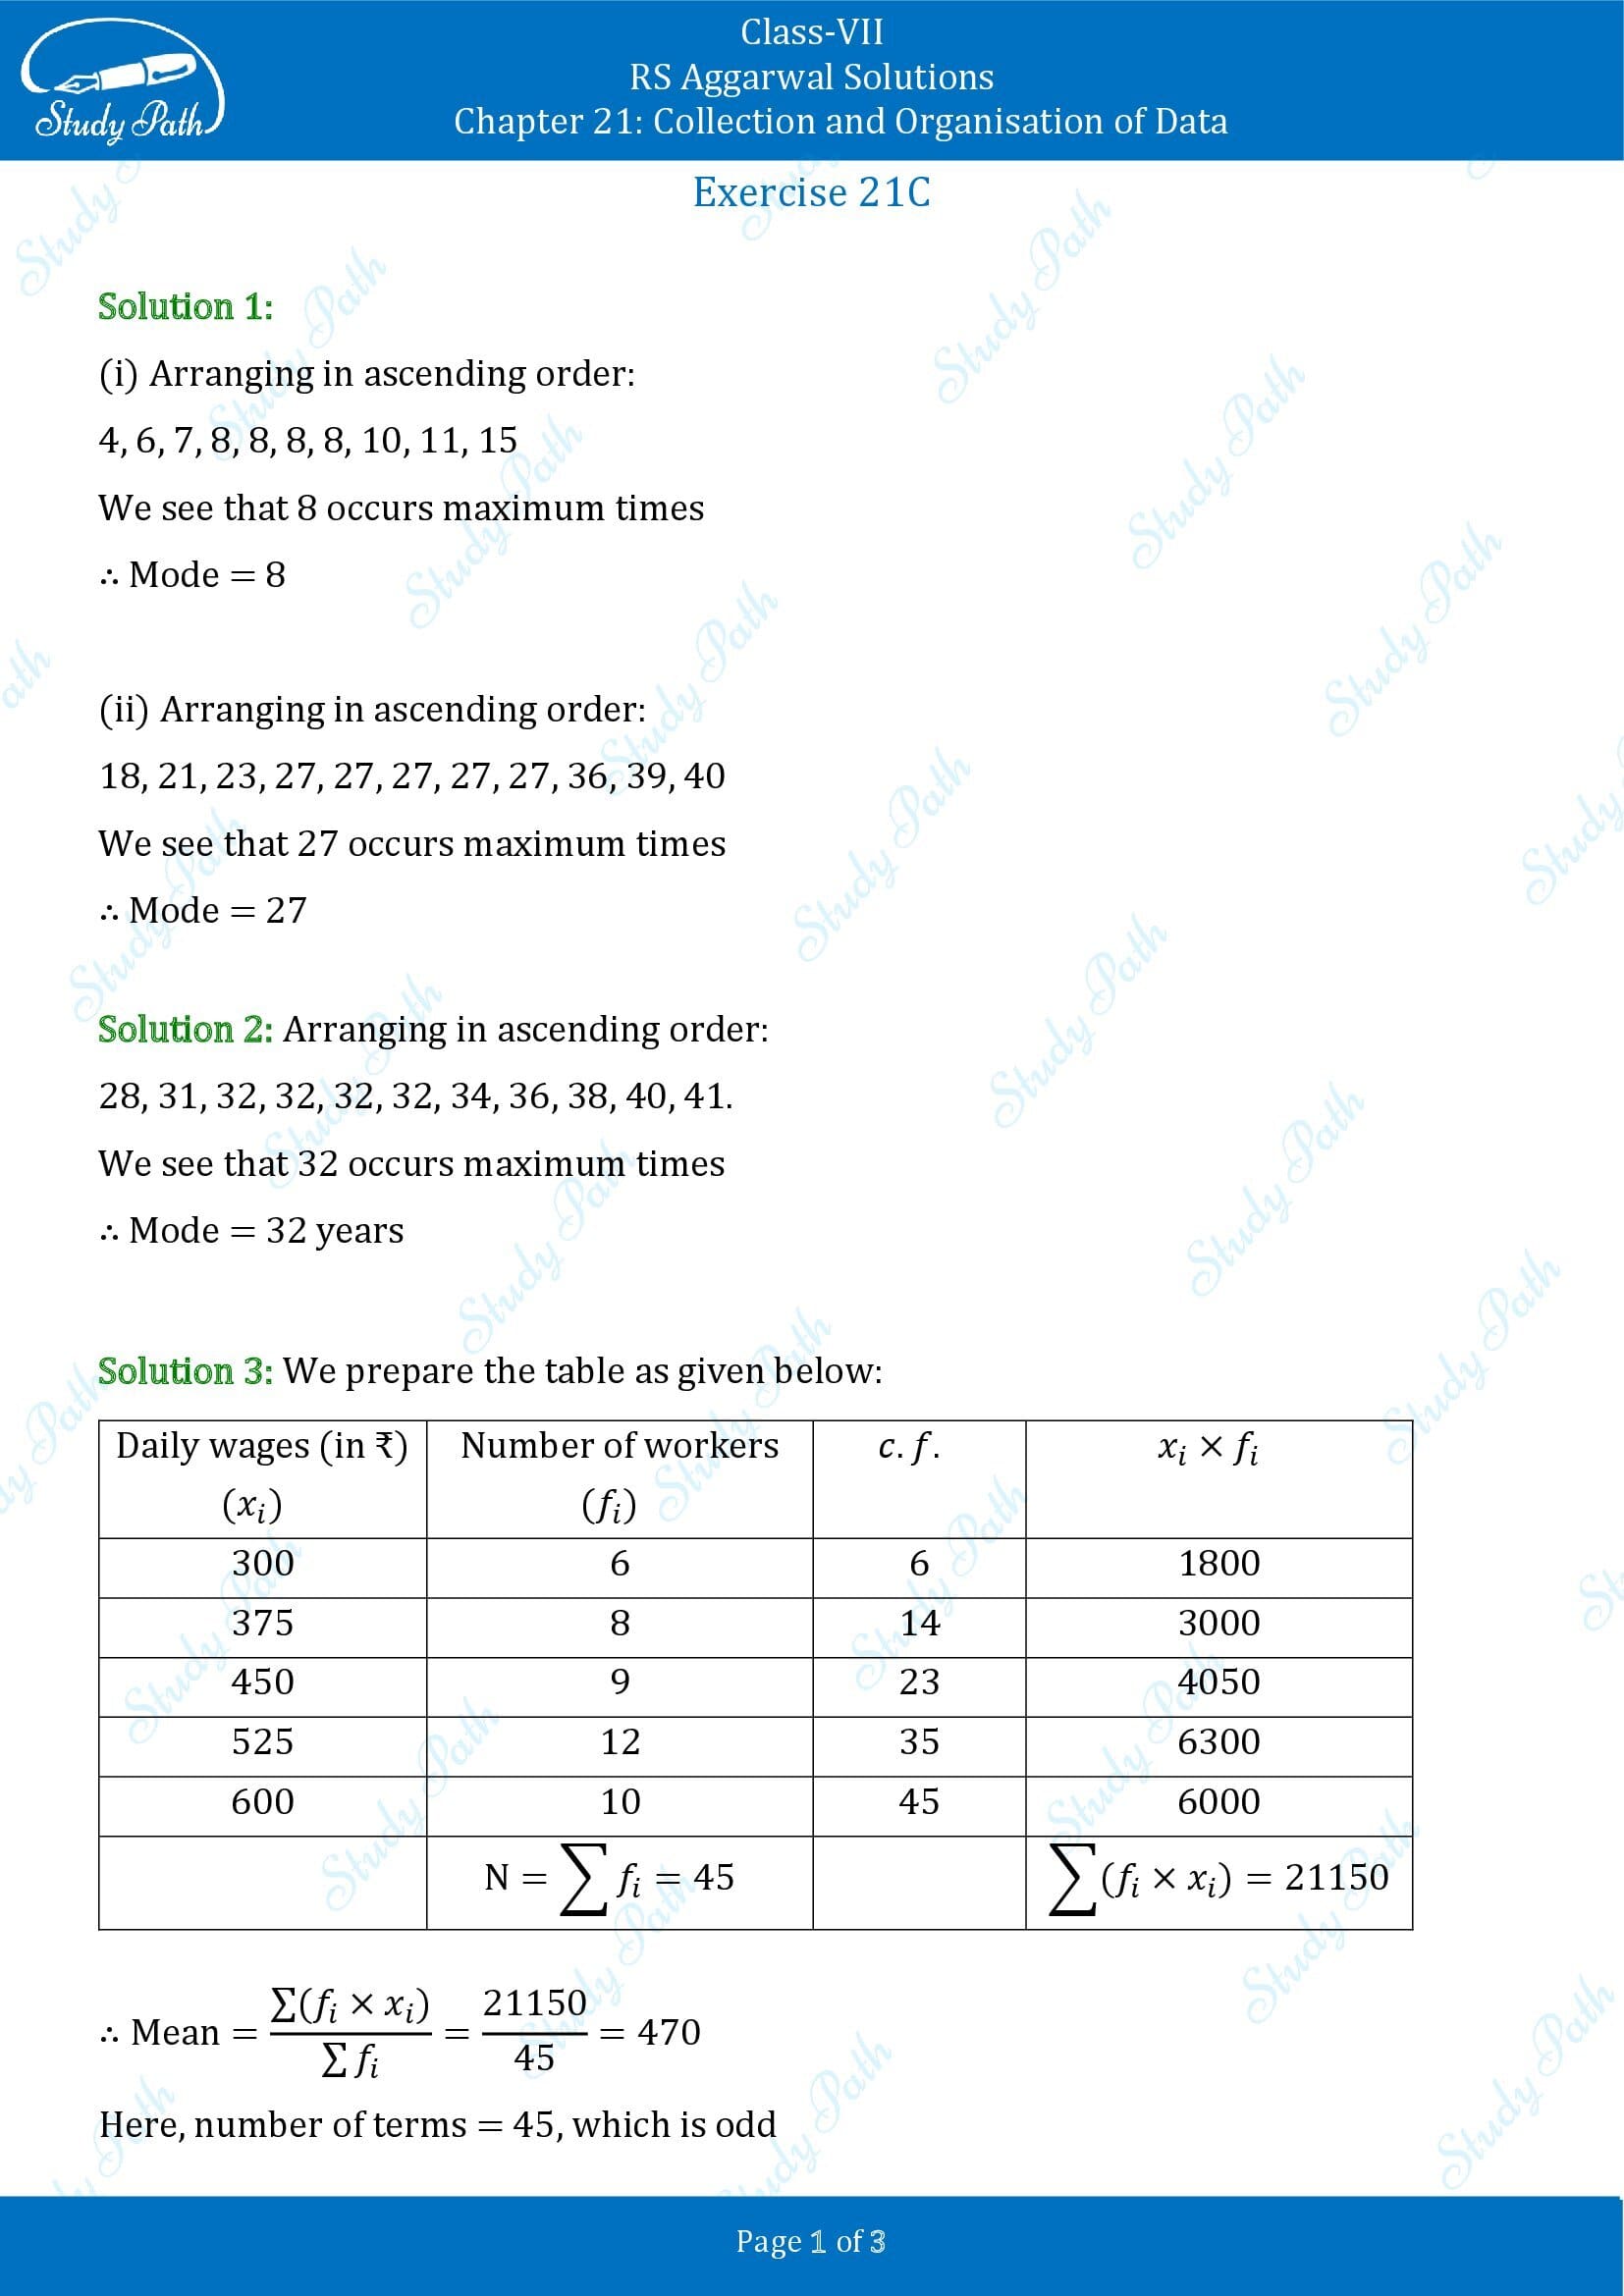 RS Aggarwal Solutions Class 7 Chapter 21 Collection and Organisation of Data Exercise 21C 00001